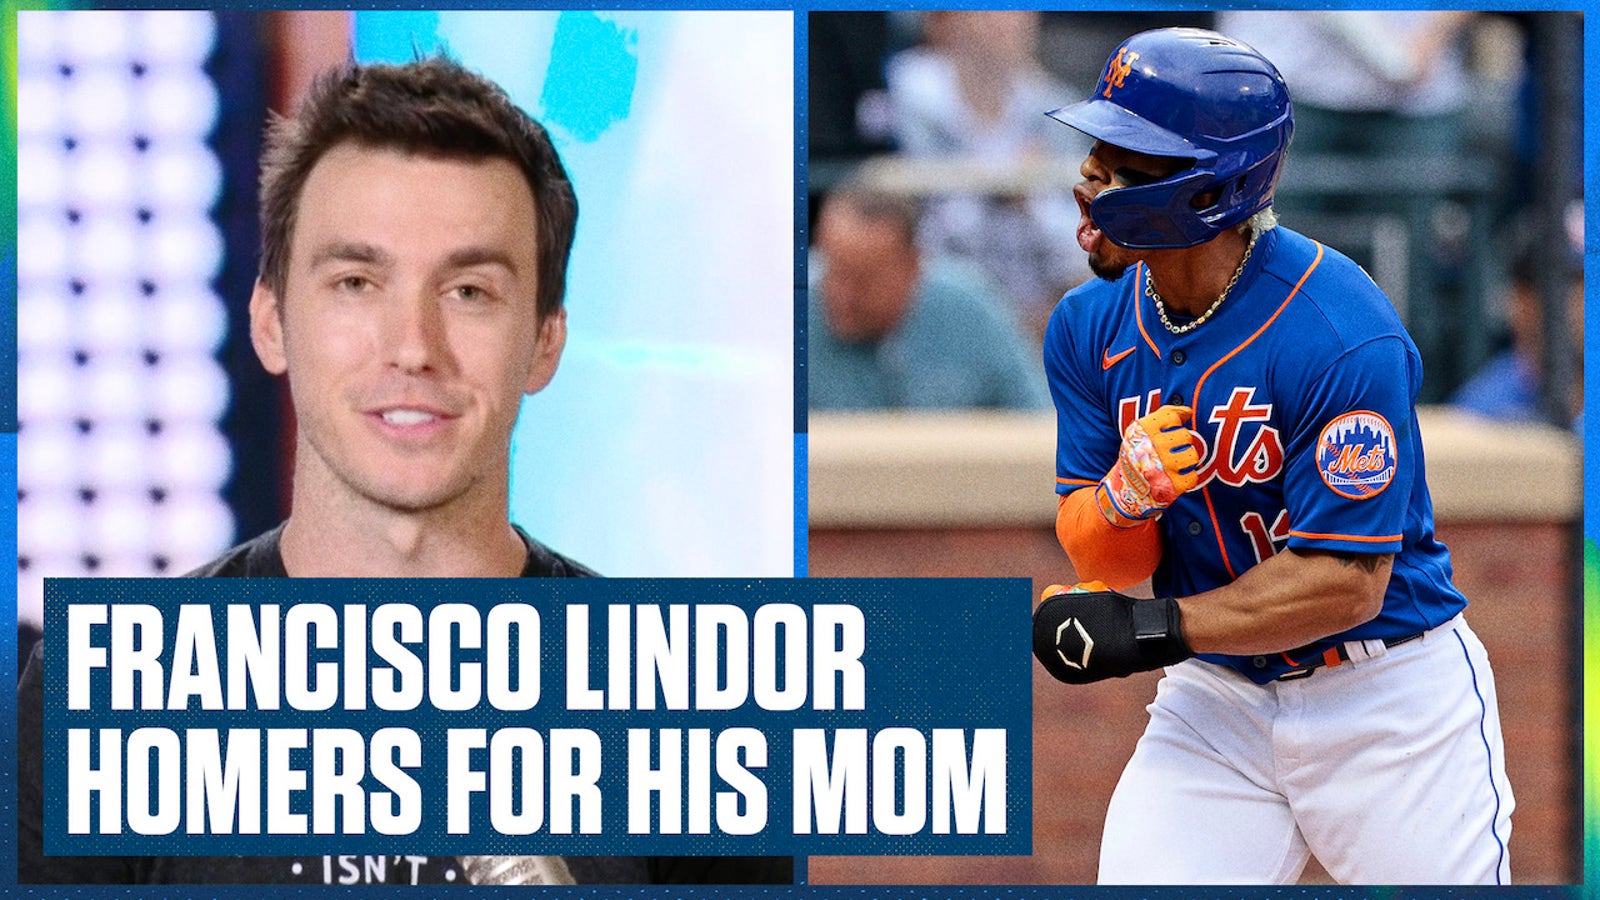 Francisco Lindor hits home run after surprise visit from his mom